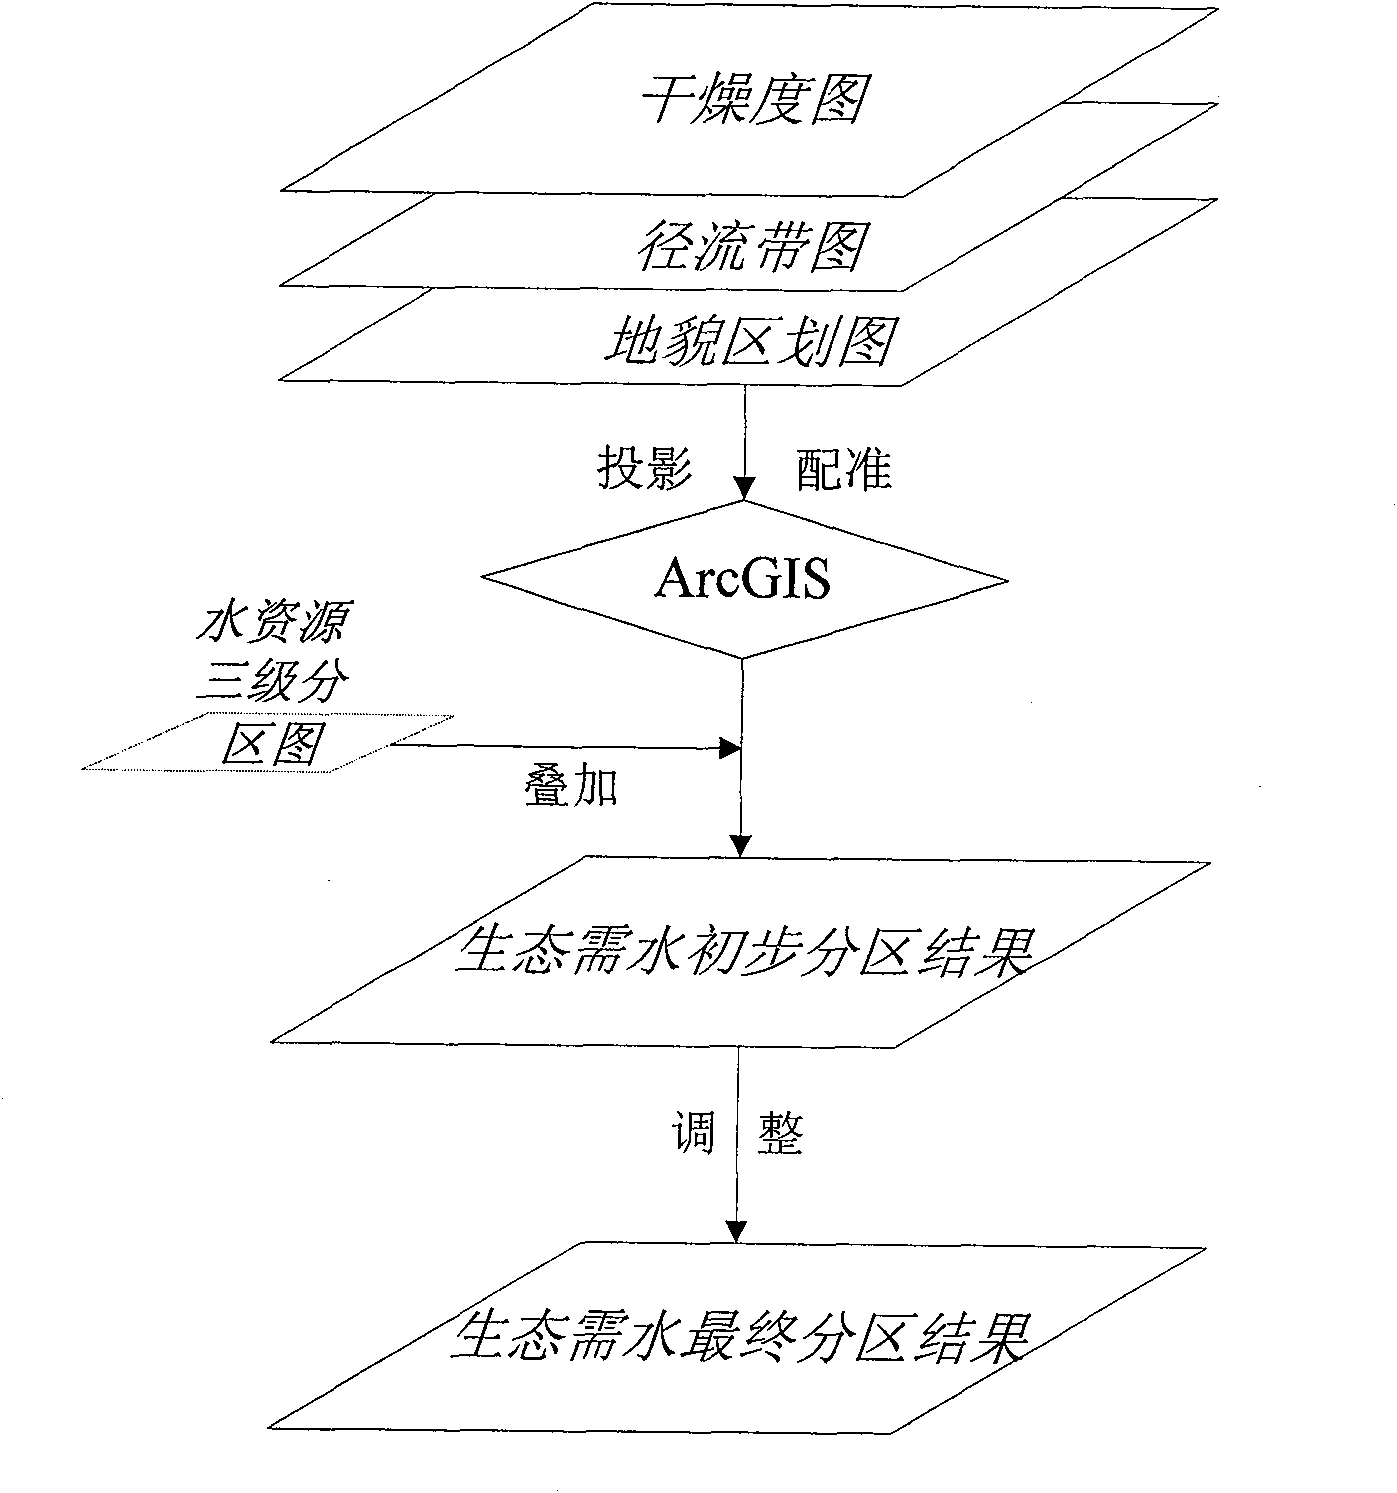 Index and method for ecological water demand zoning and classification